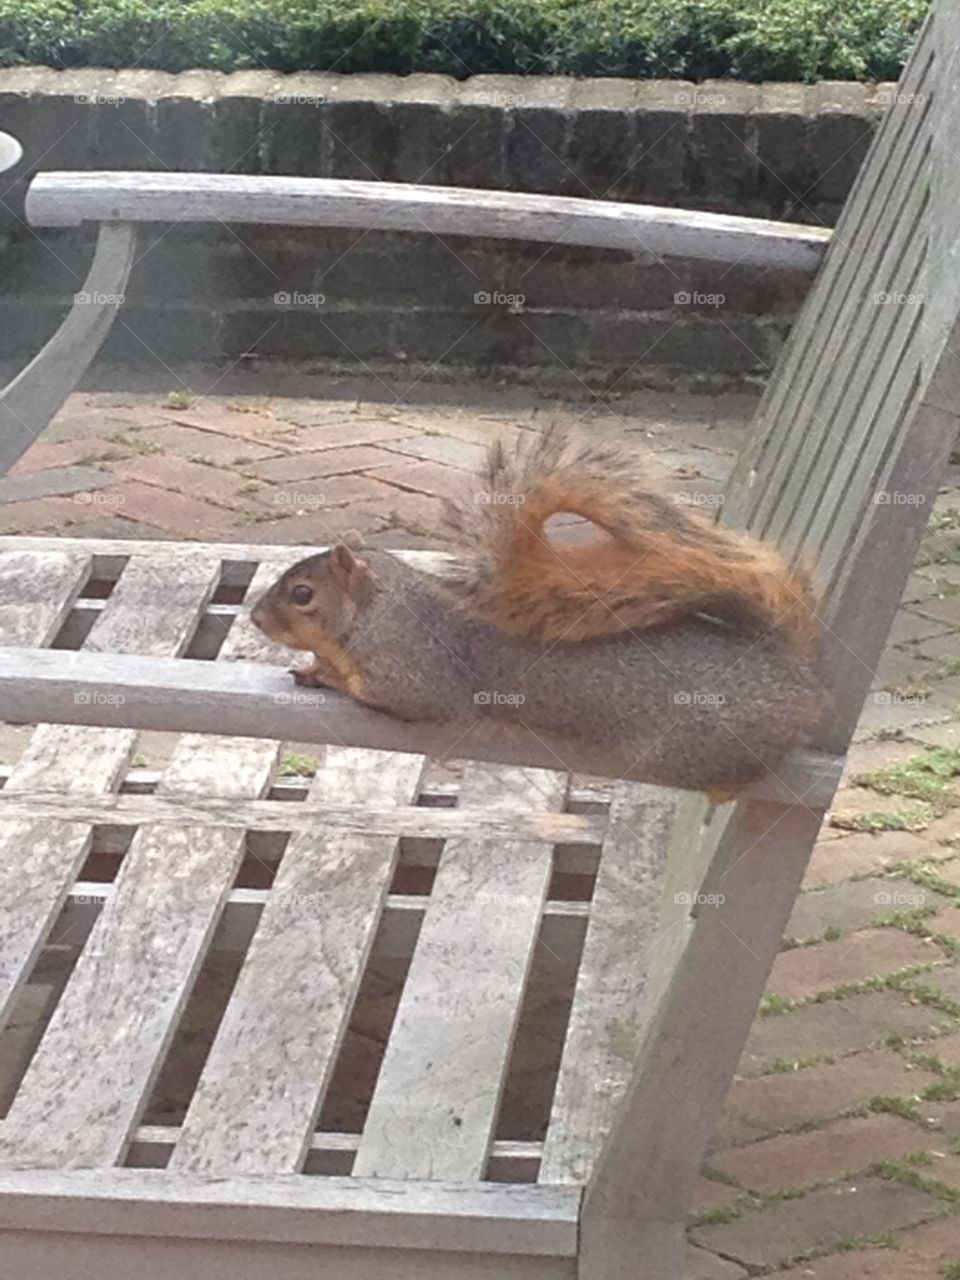 What is this squirrel doing??